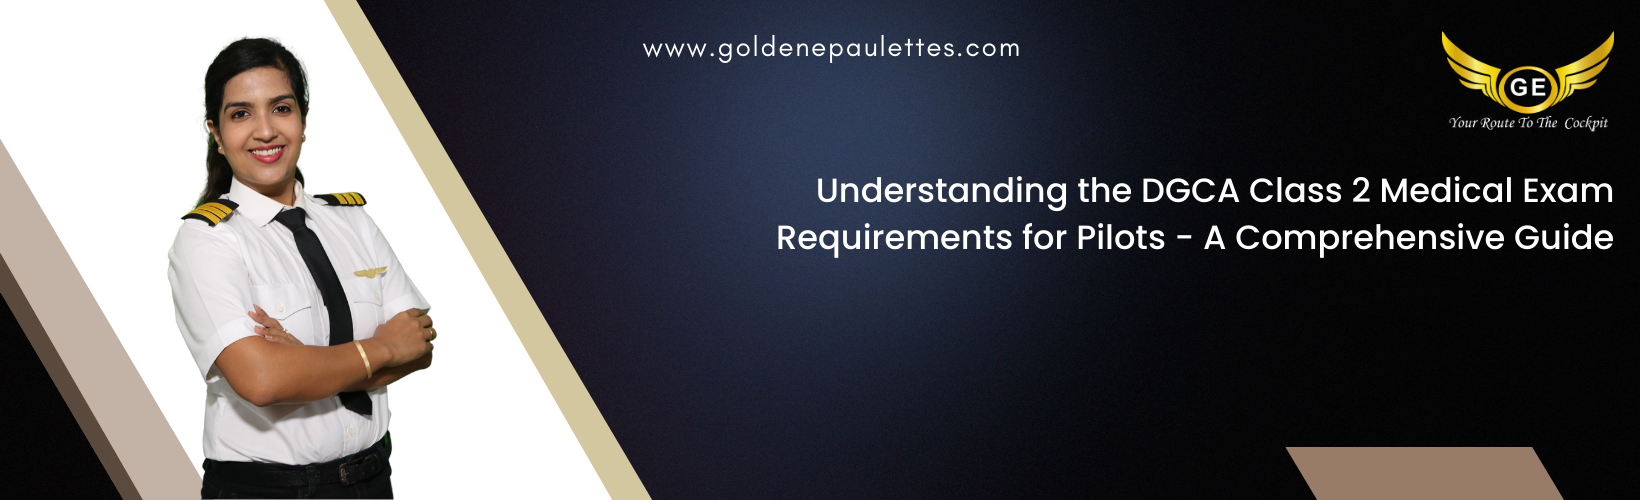 Understanding the Requirements for a DGCA Class 2 Medical Exam for Pilots - This article will provide an in-depth understanding of the requirements for the DGCA Class 2 Medical Exam for Pilots. It will discuss the medical standards, tests and documents that are required. (Reference